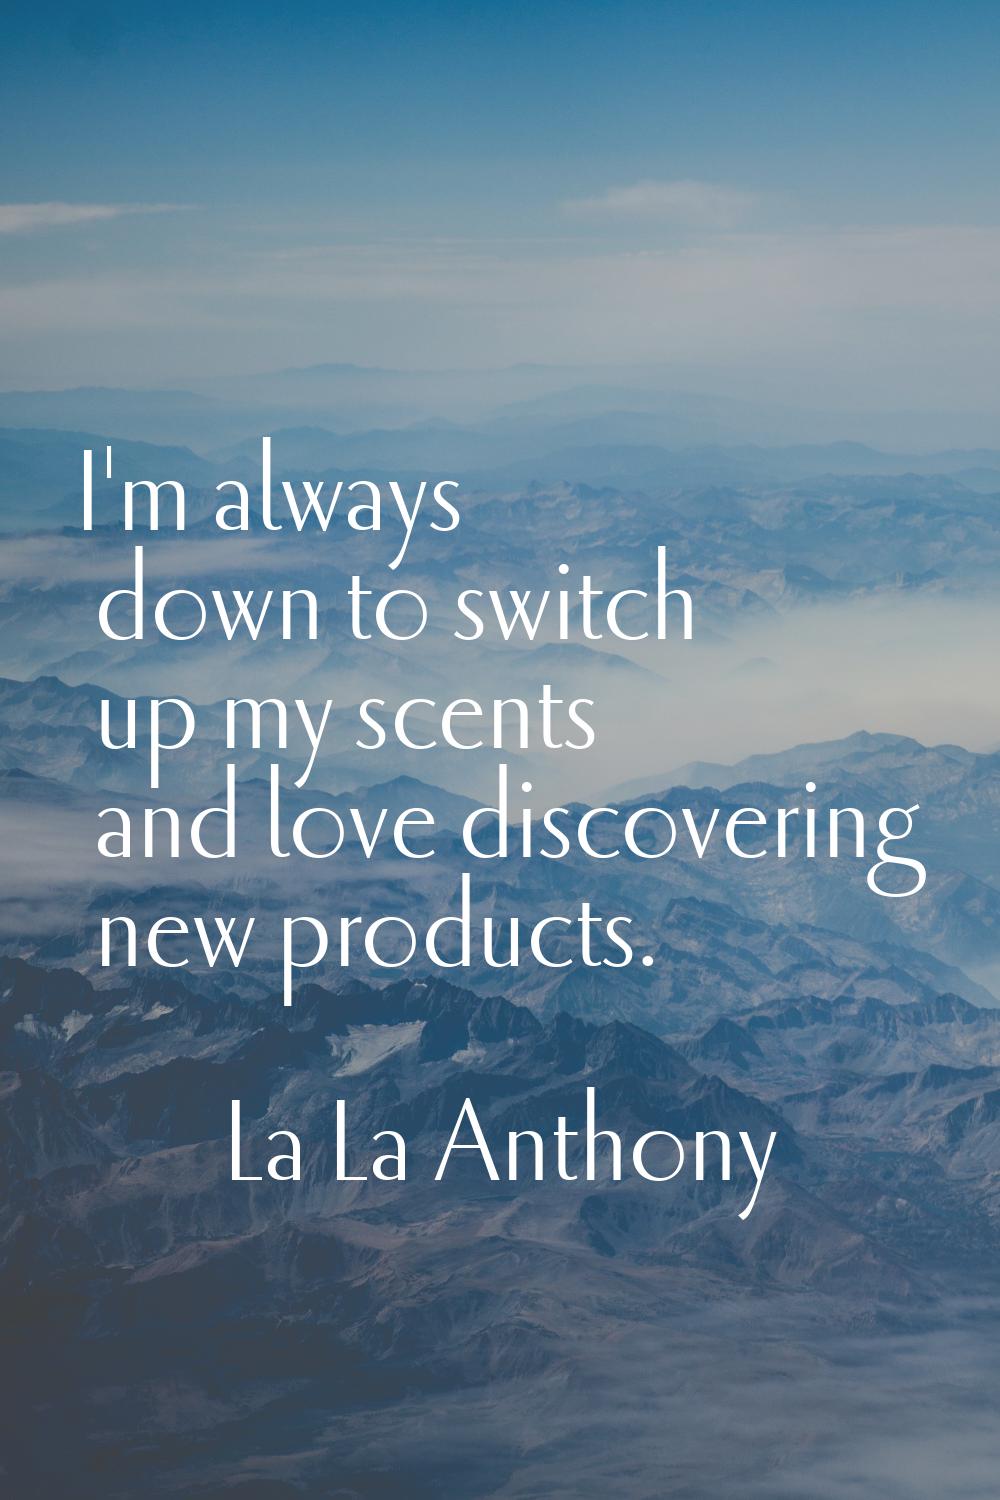 I'm always down to switch up my scents and love discovering new products.